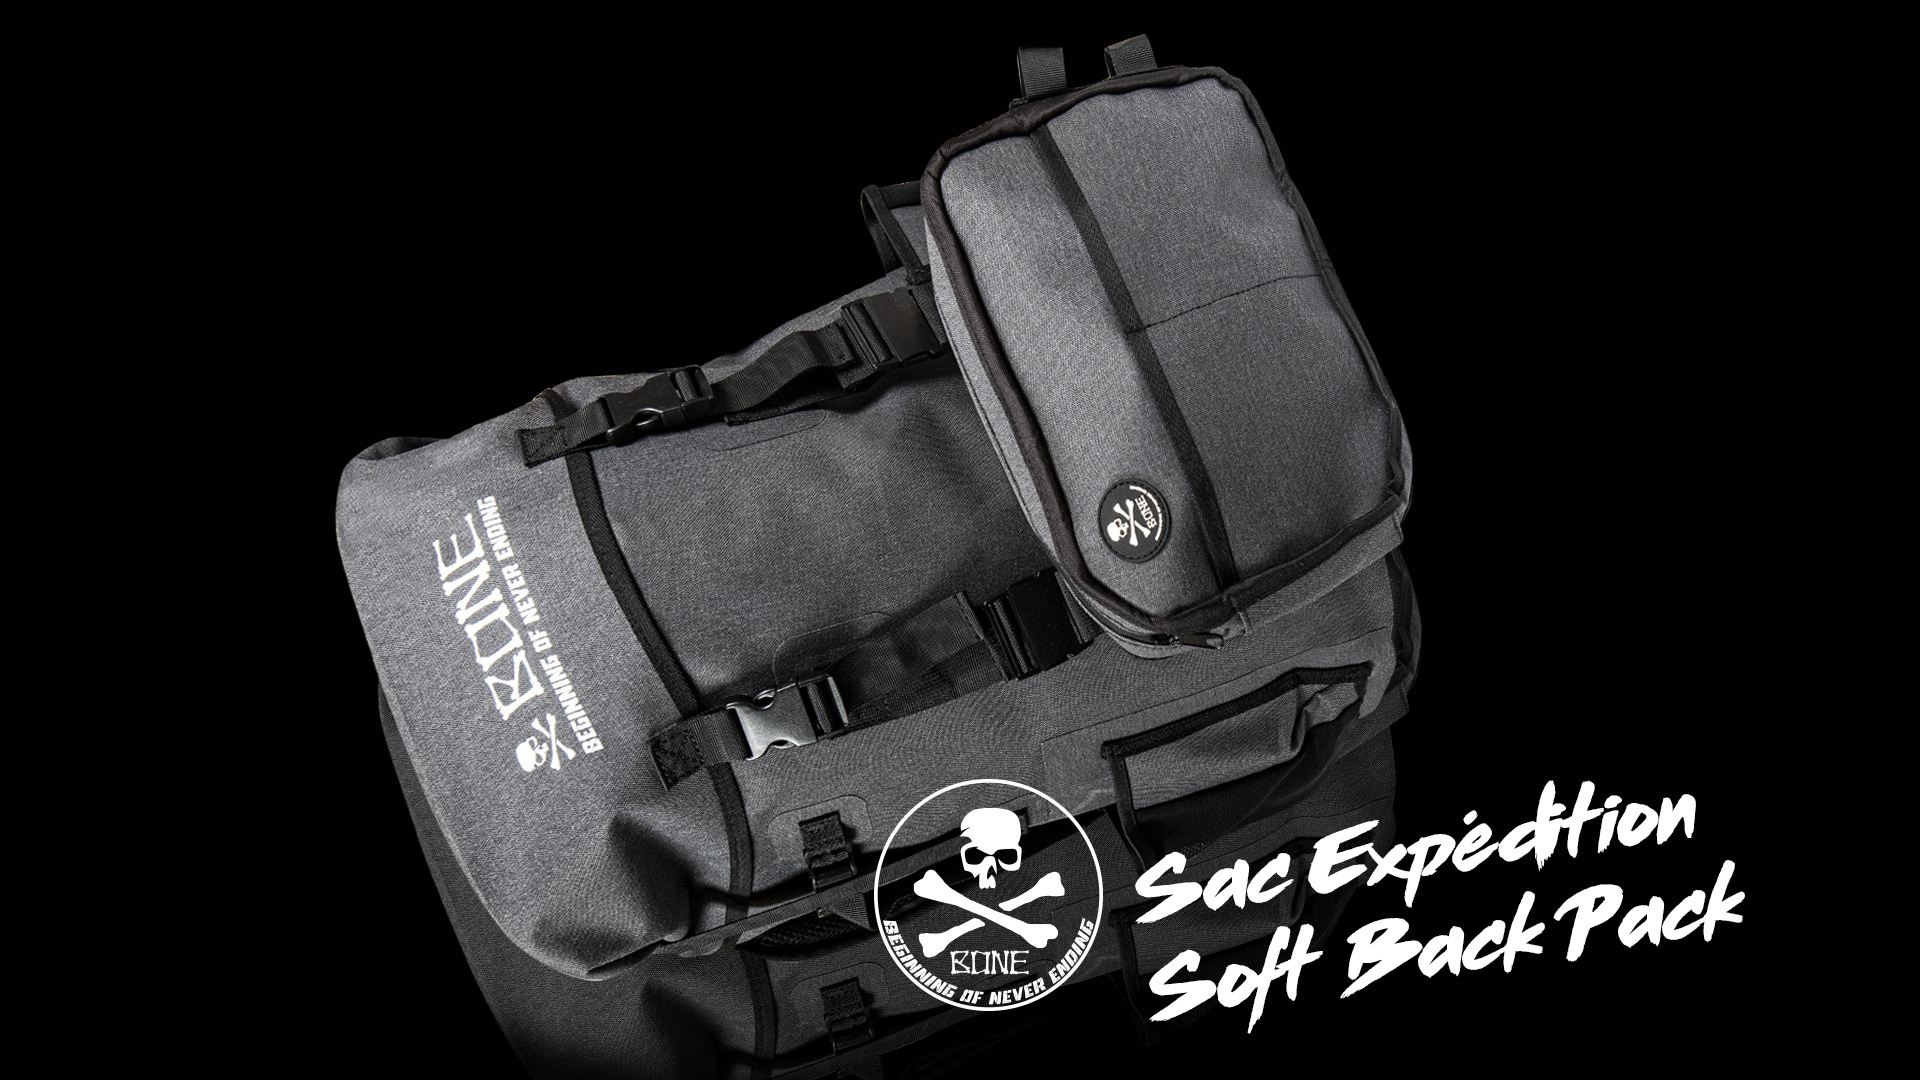 Bone Expedition Soft Back Pack 30L – Way Of Fishing